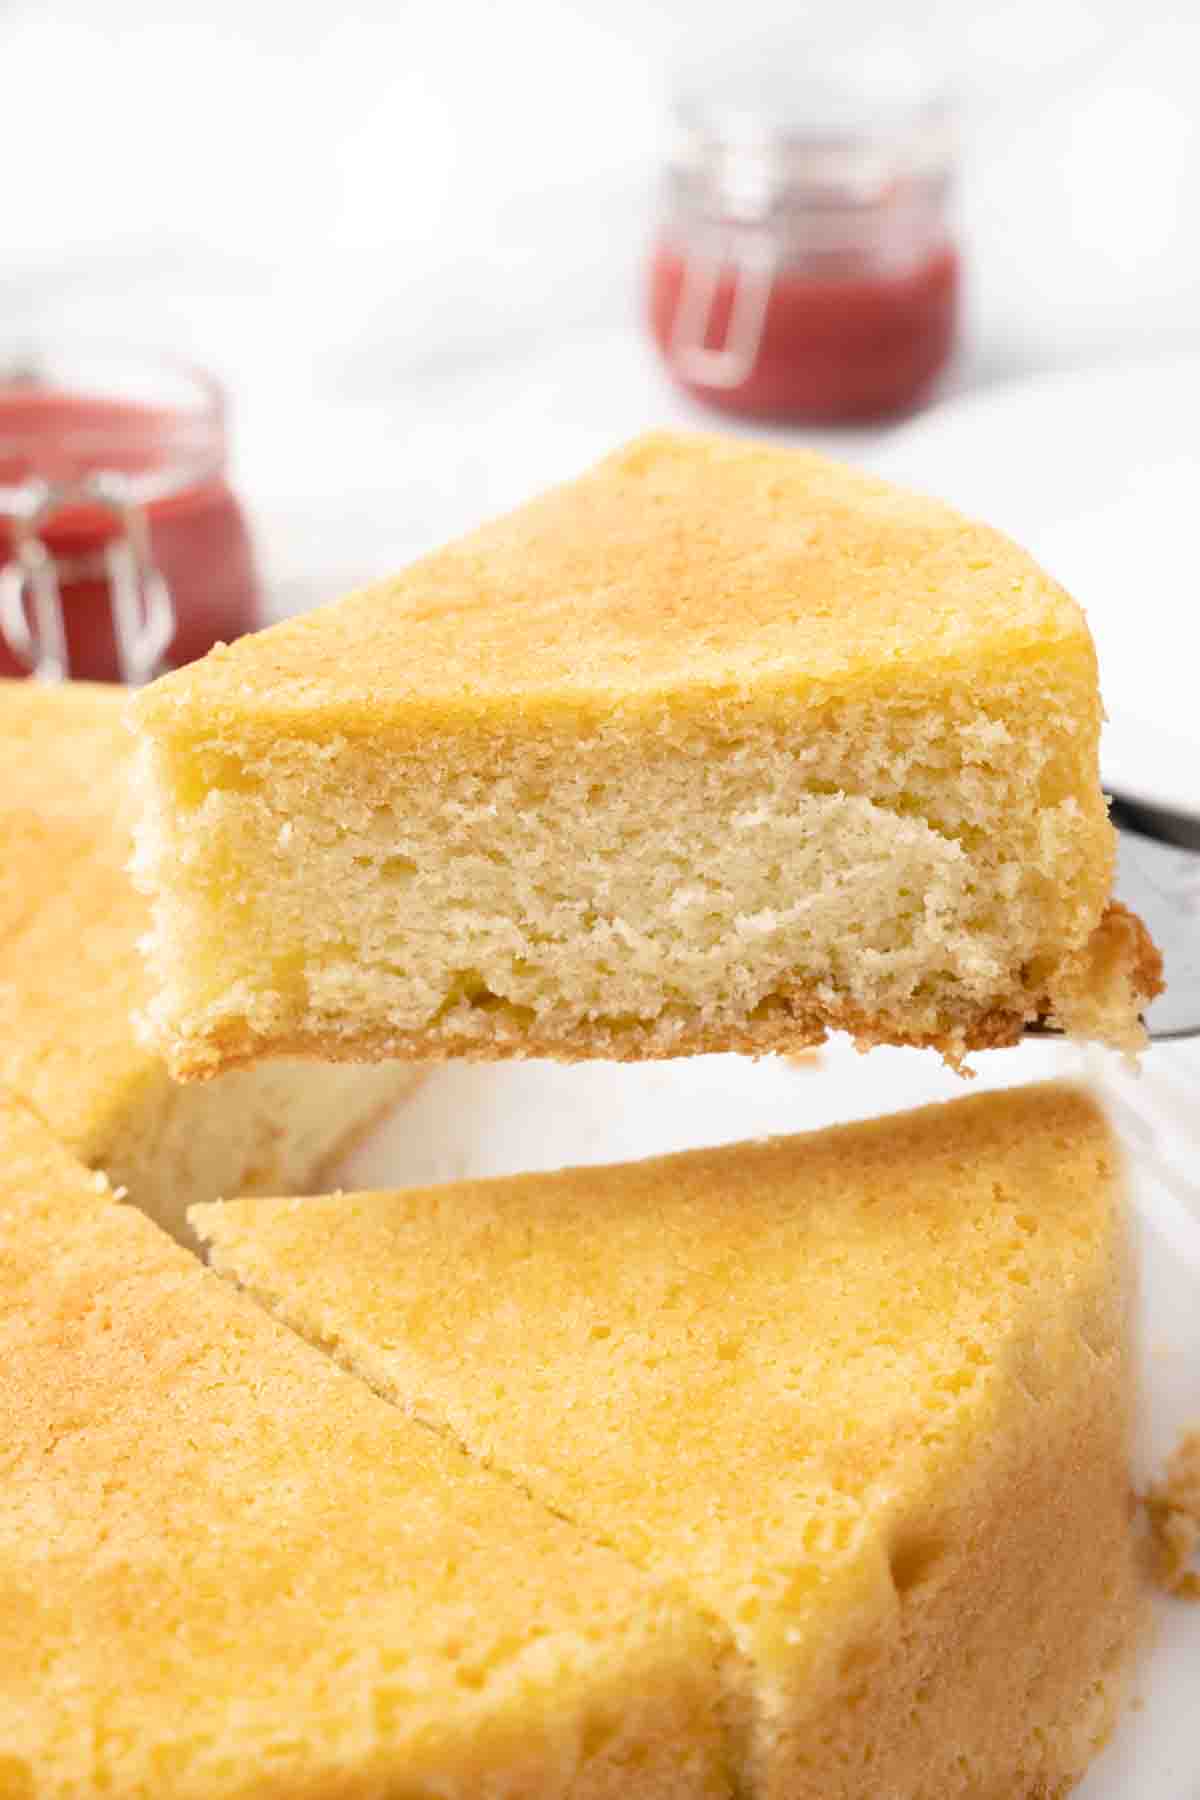 slice being taken out of whole sponge cake.